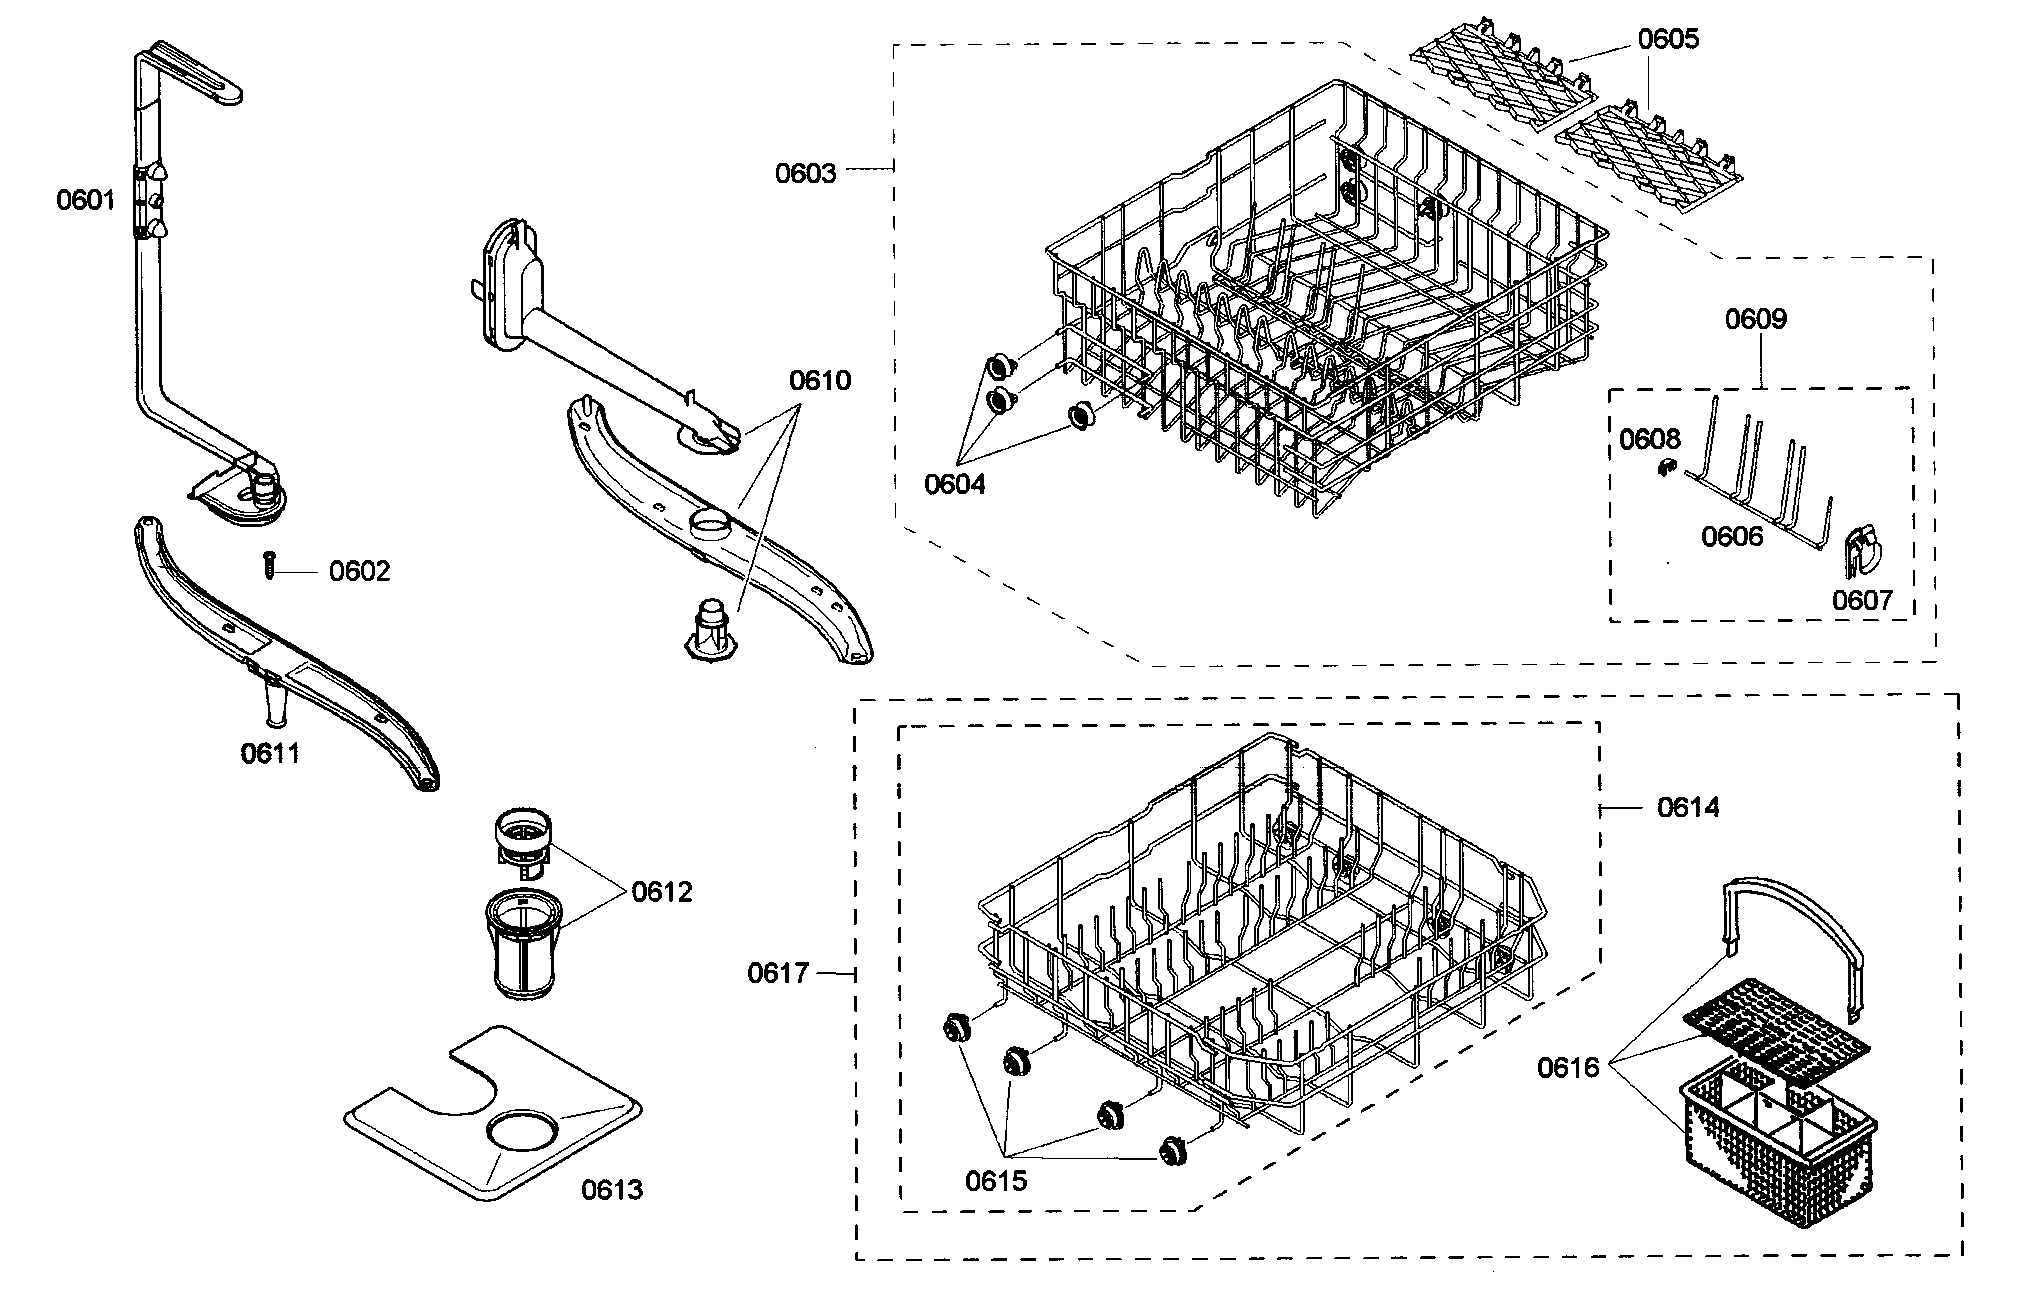 Wiring Diagram For Bosch Dishwasher from c.searspartsdirect.com